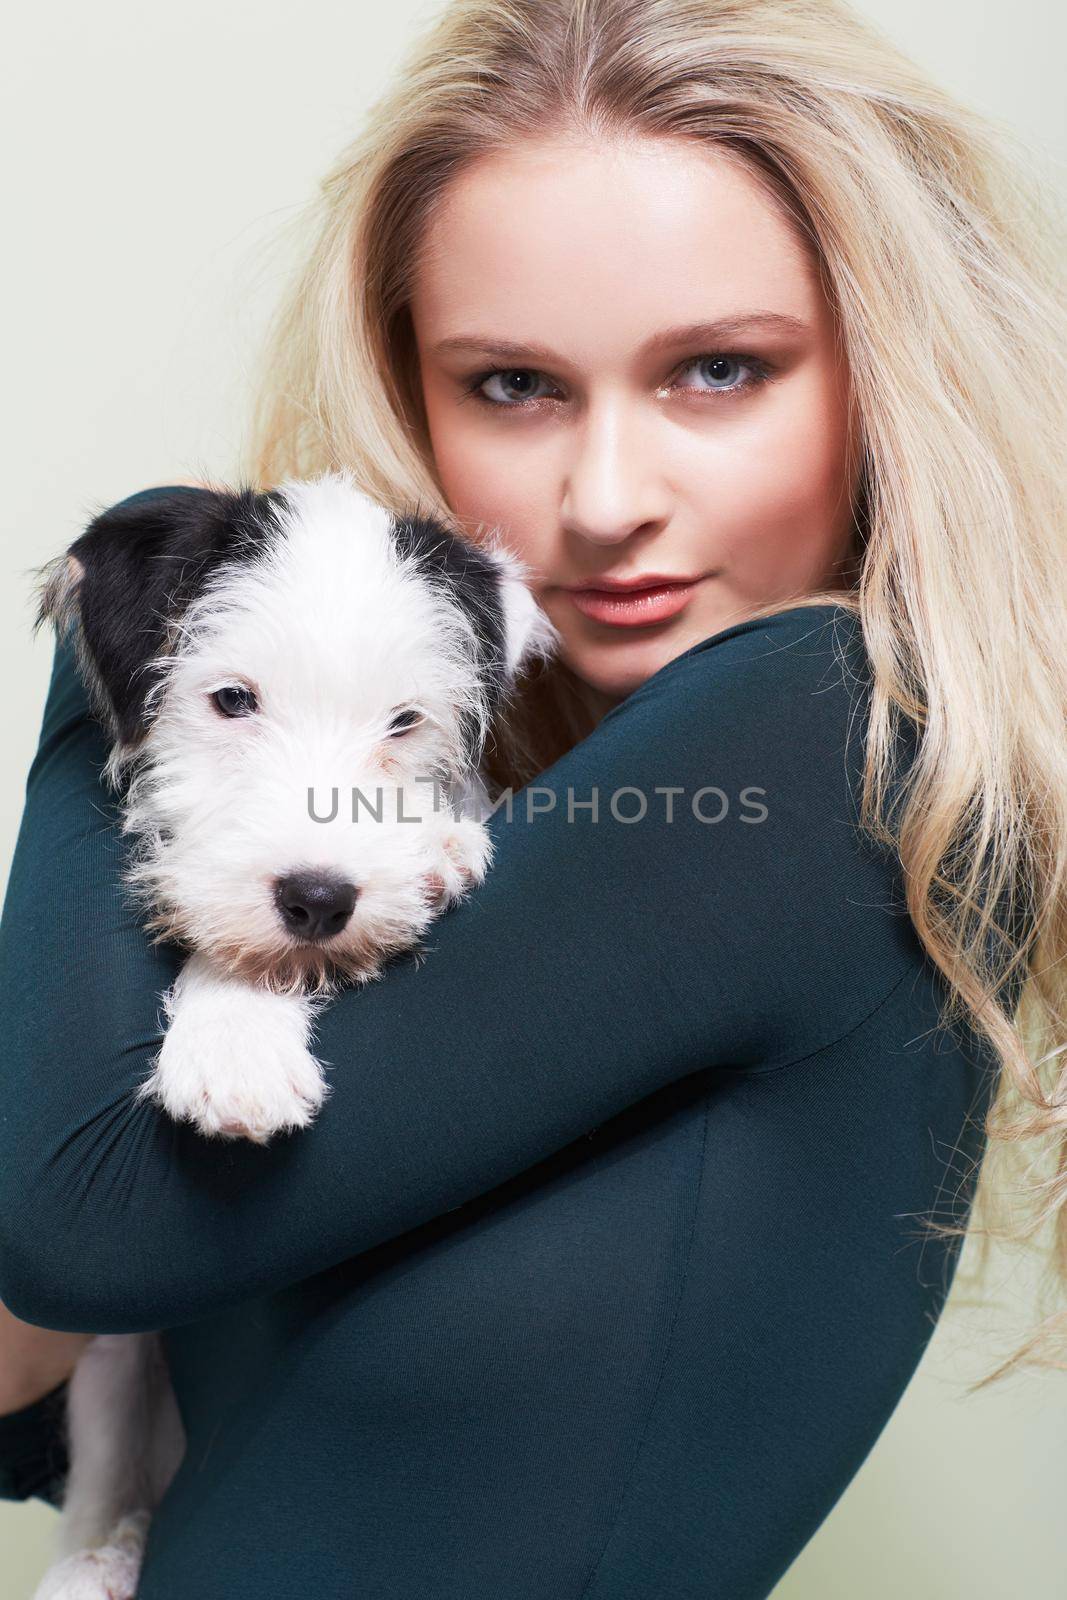 Hes my best friend. Portrait of a gorgeous young woman holding her adorable dog